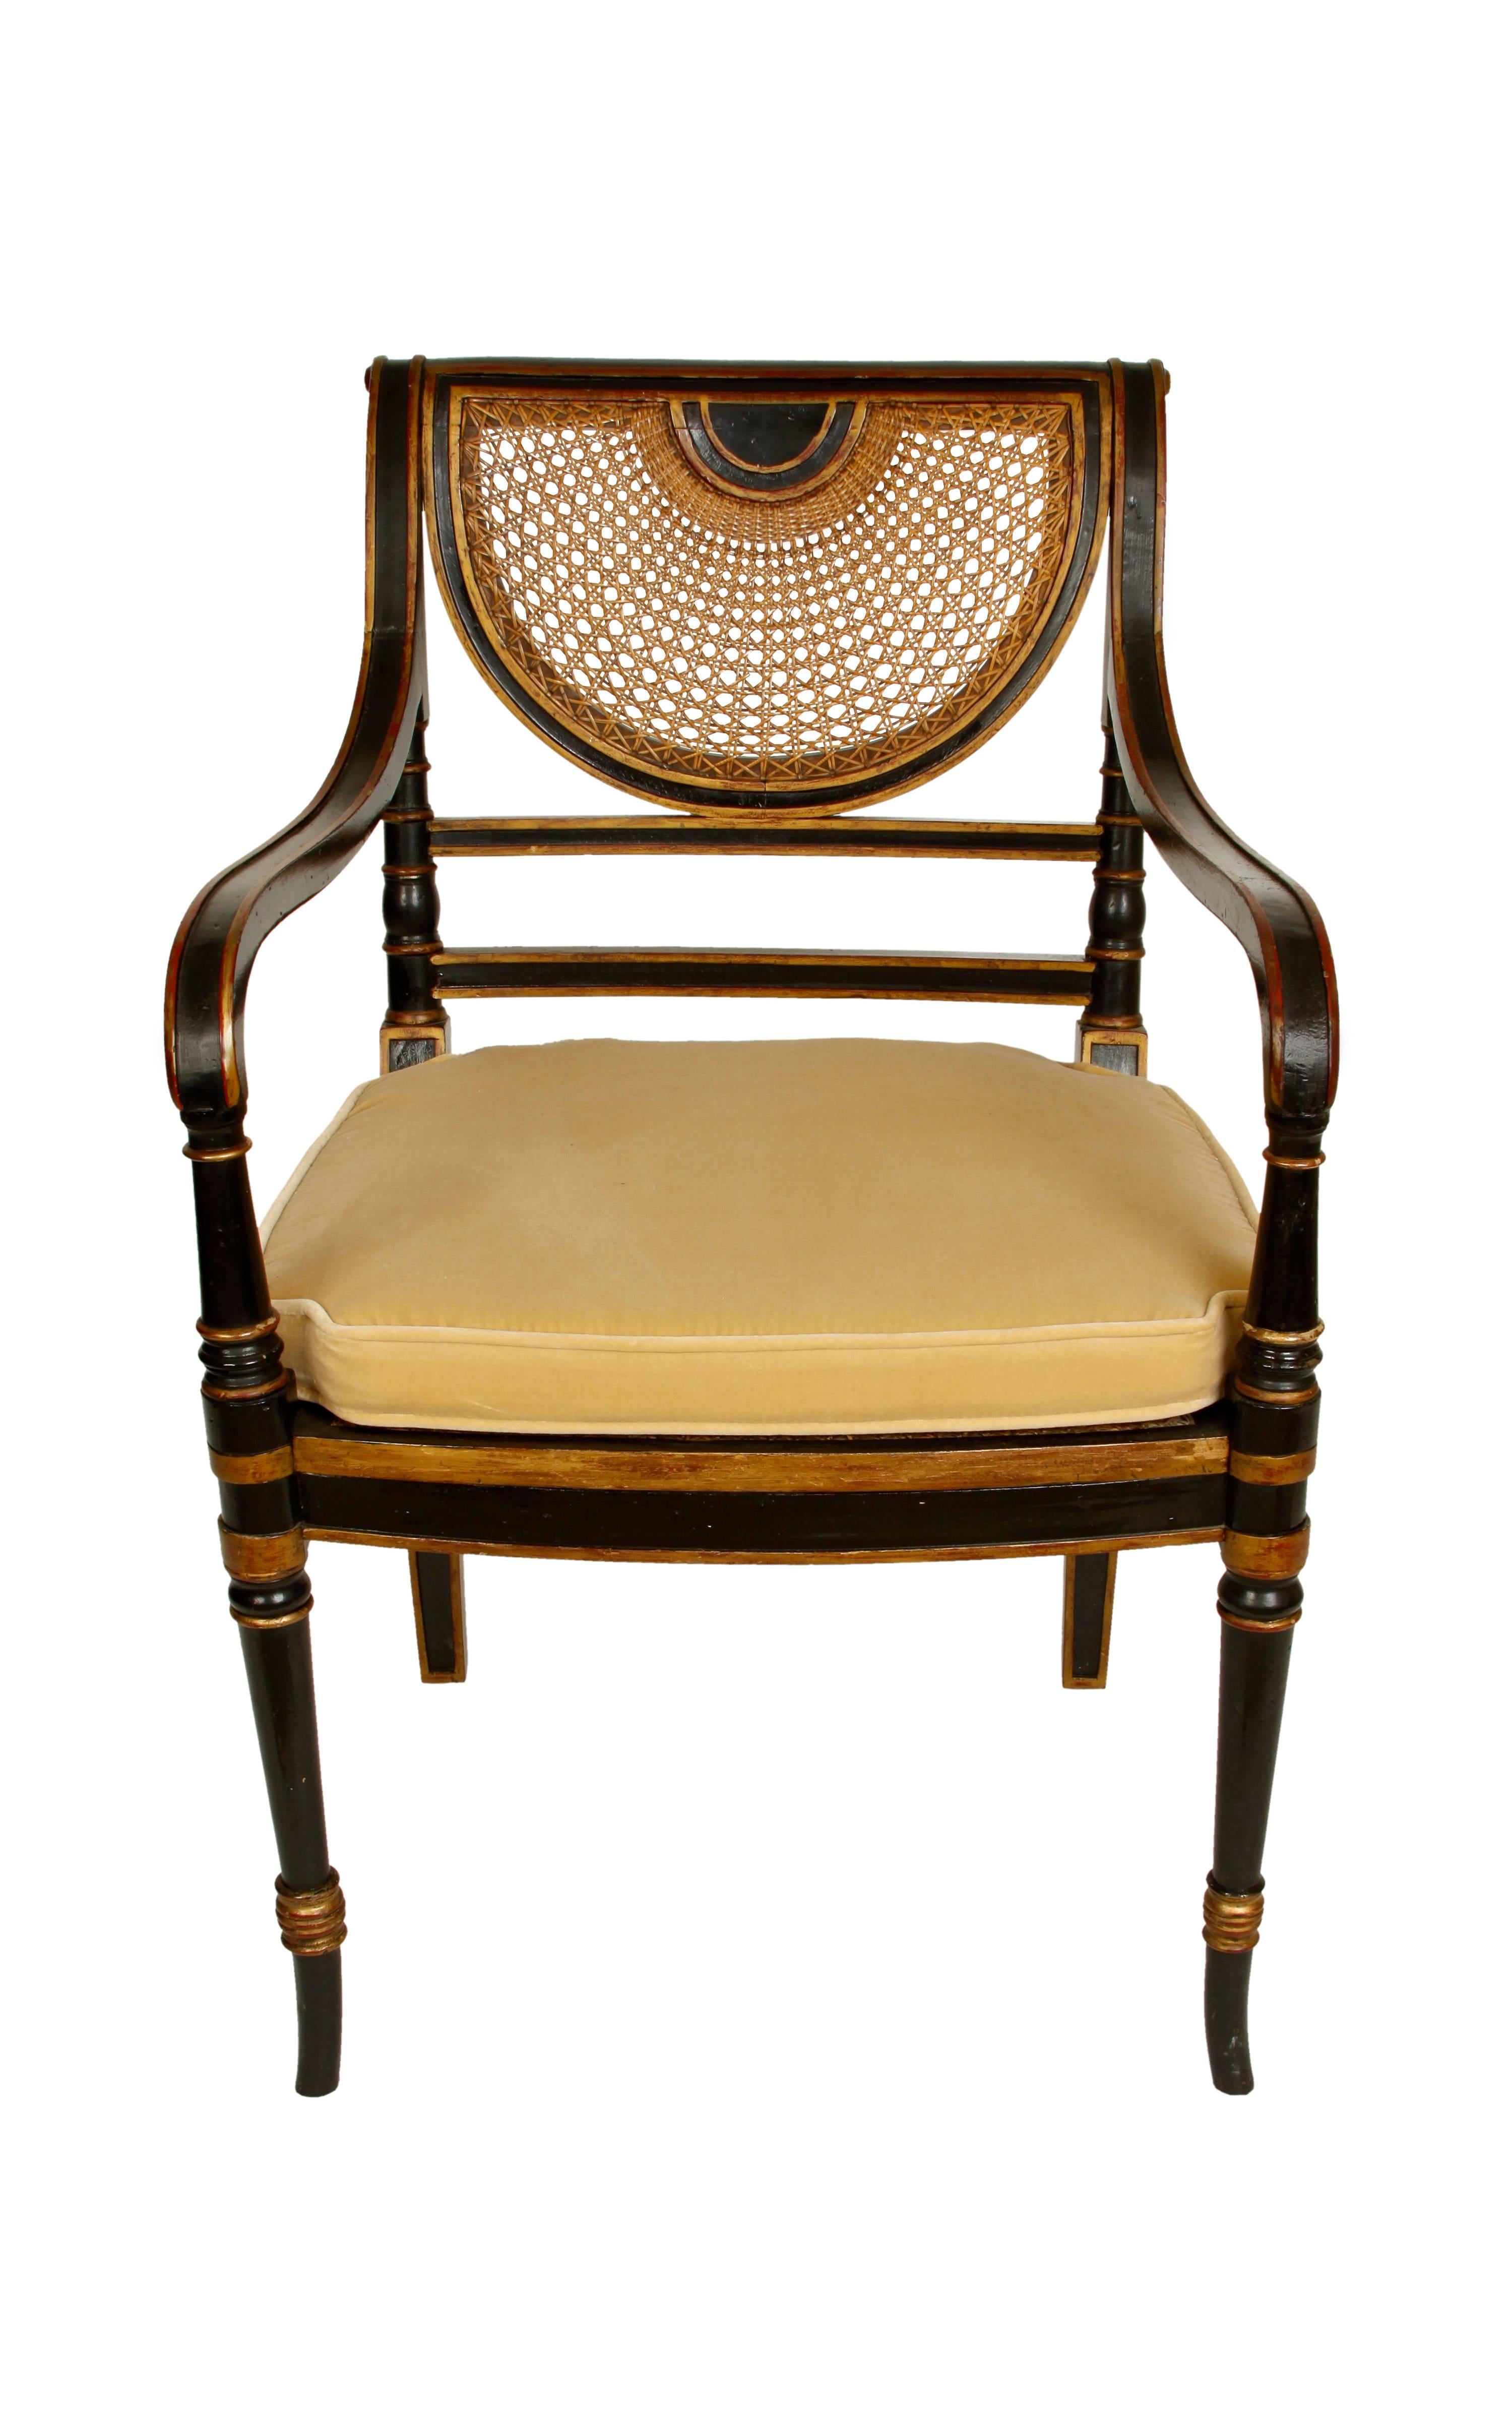 A 1940s Regency style armchair. Black painted wood with gilt detailing and caned seat and crescent back. Removable cushion.